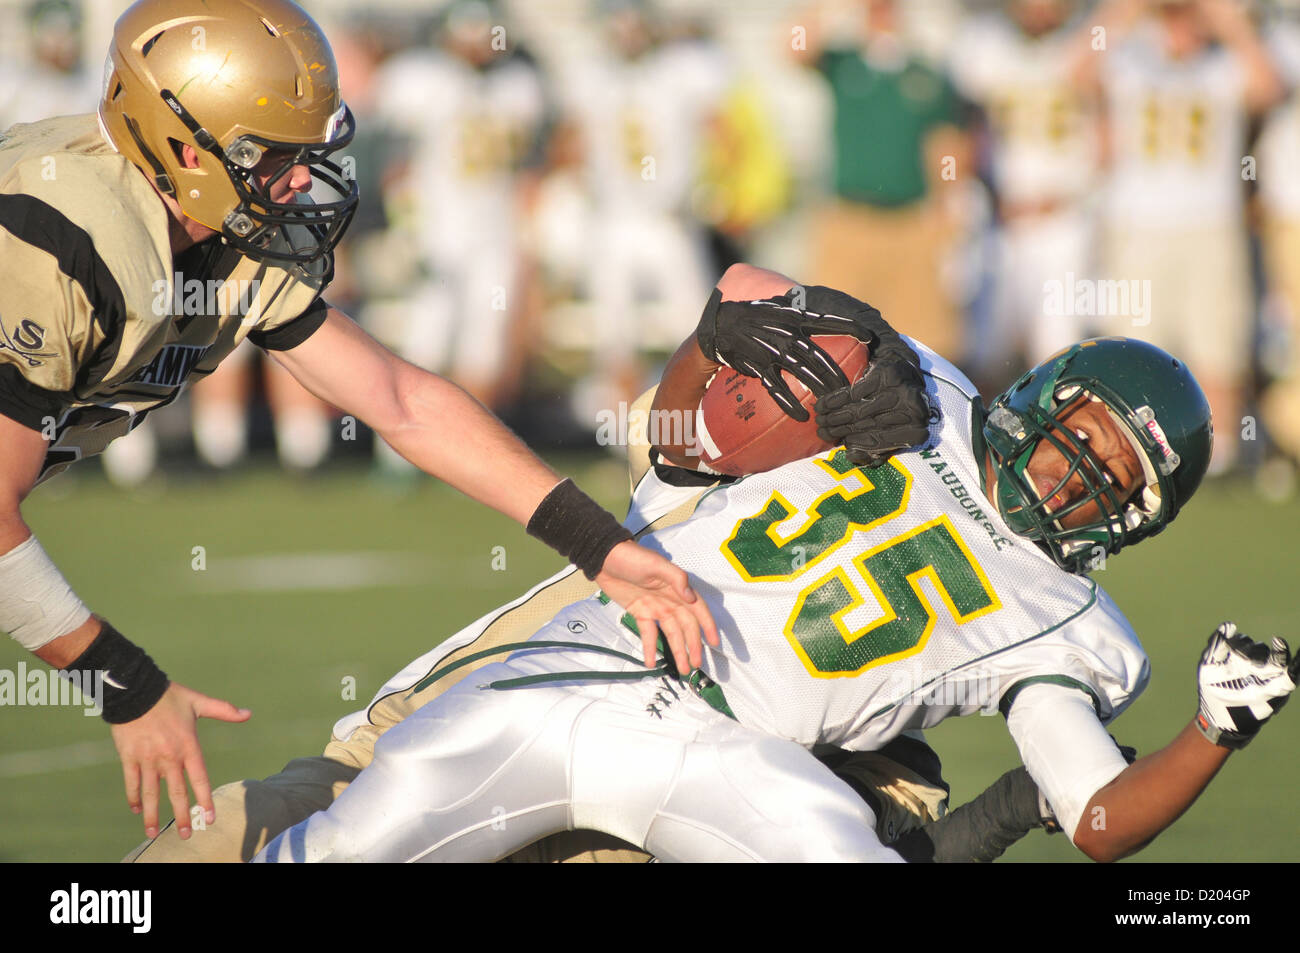 Football running back is driven backward after being tackled during a high school game. USA. Stock Photo